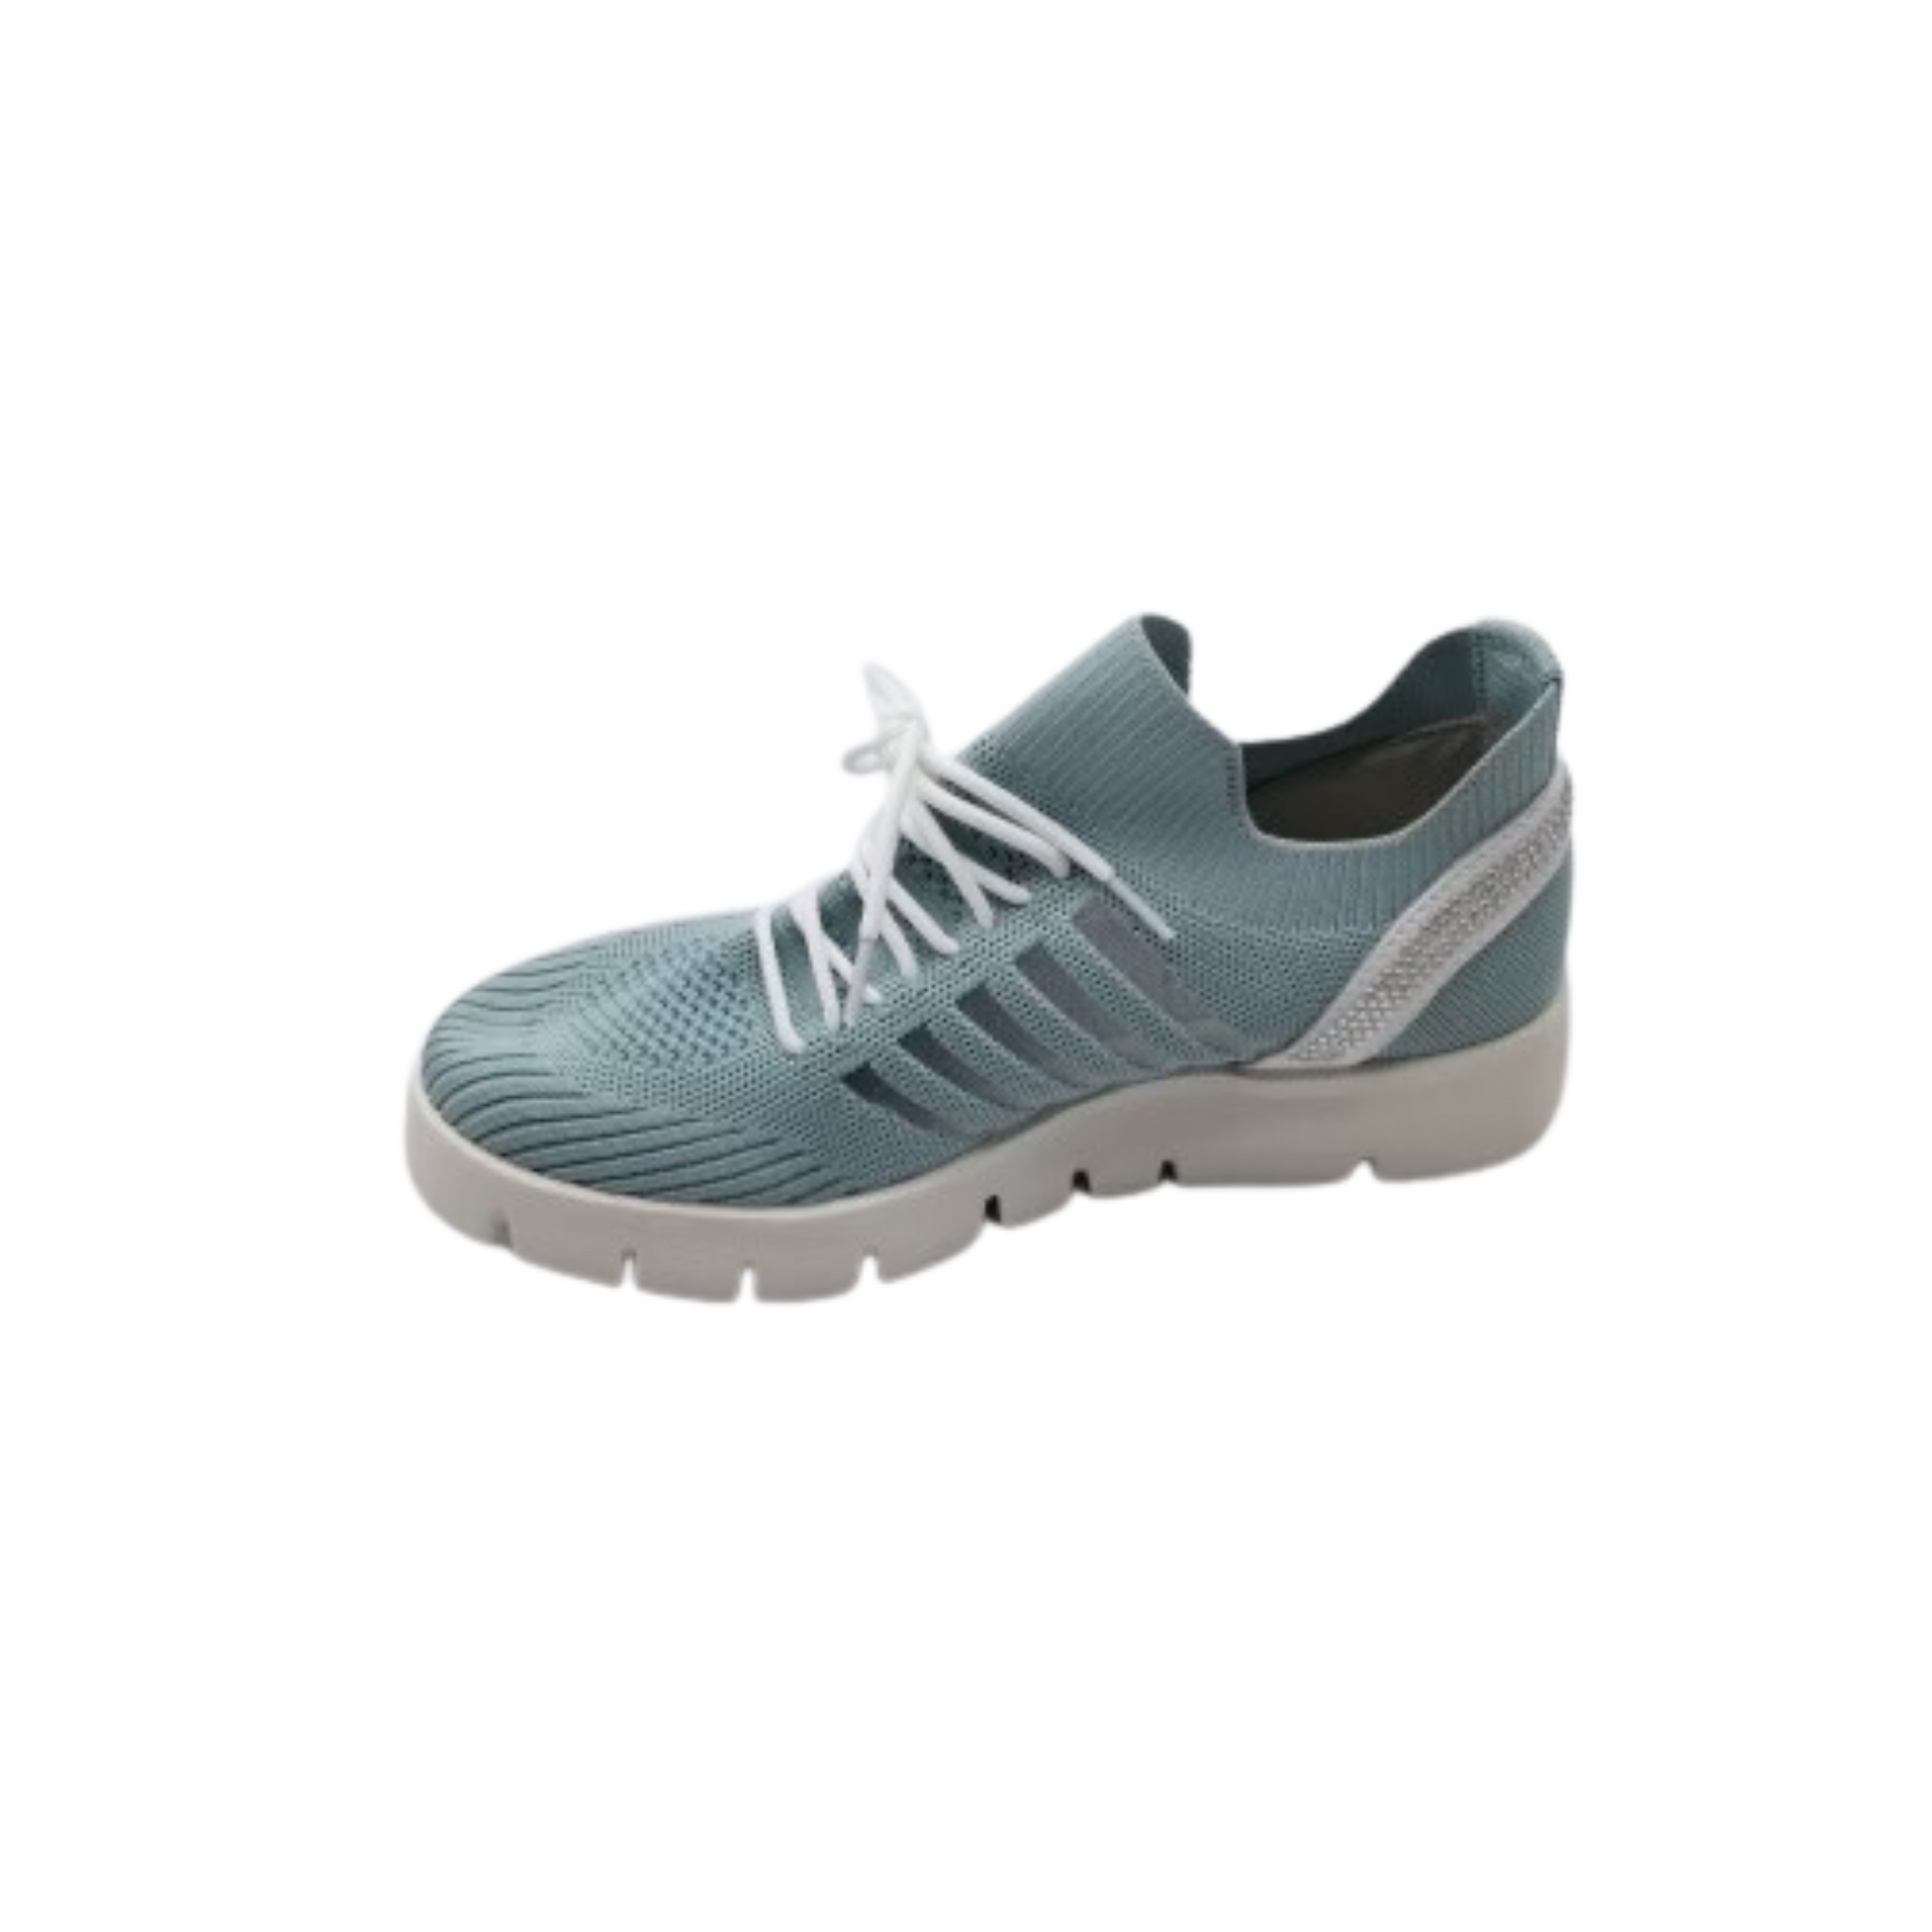 Inside view of knitted slip on sneaker in a baby blue color.  See through cut outs at arch and contrasting white band with crystals at heel.